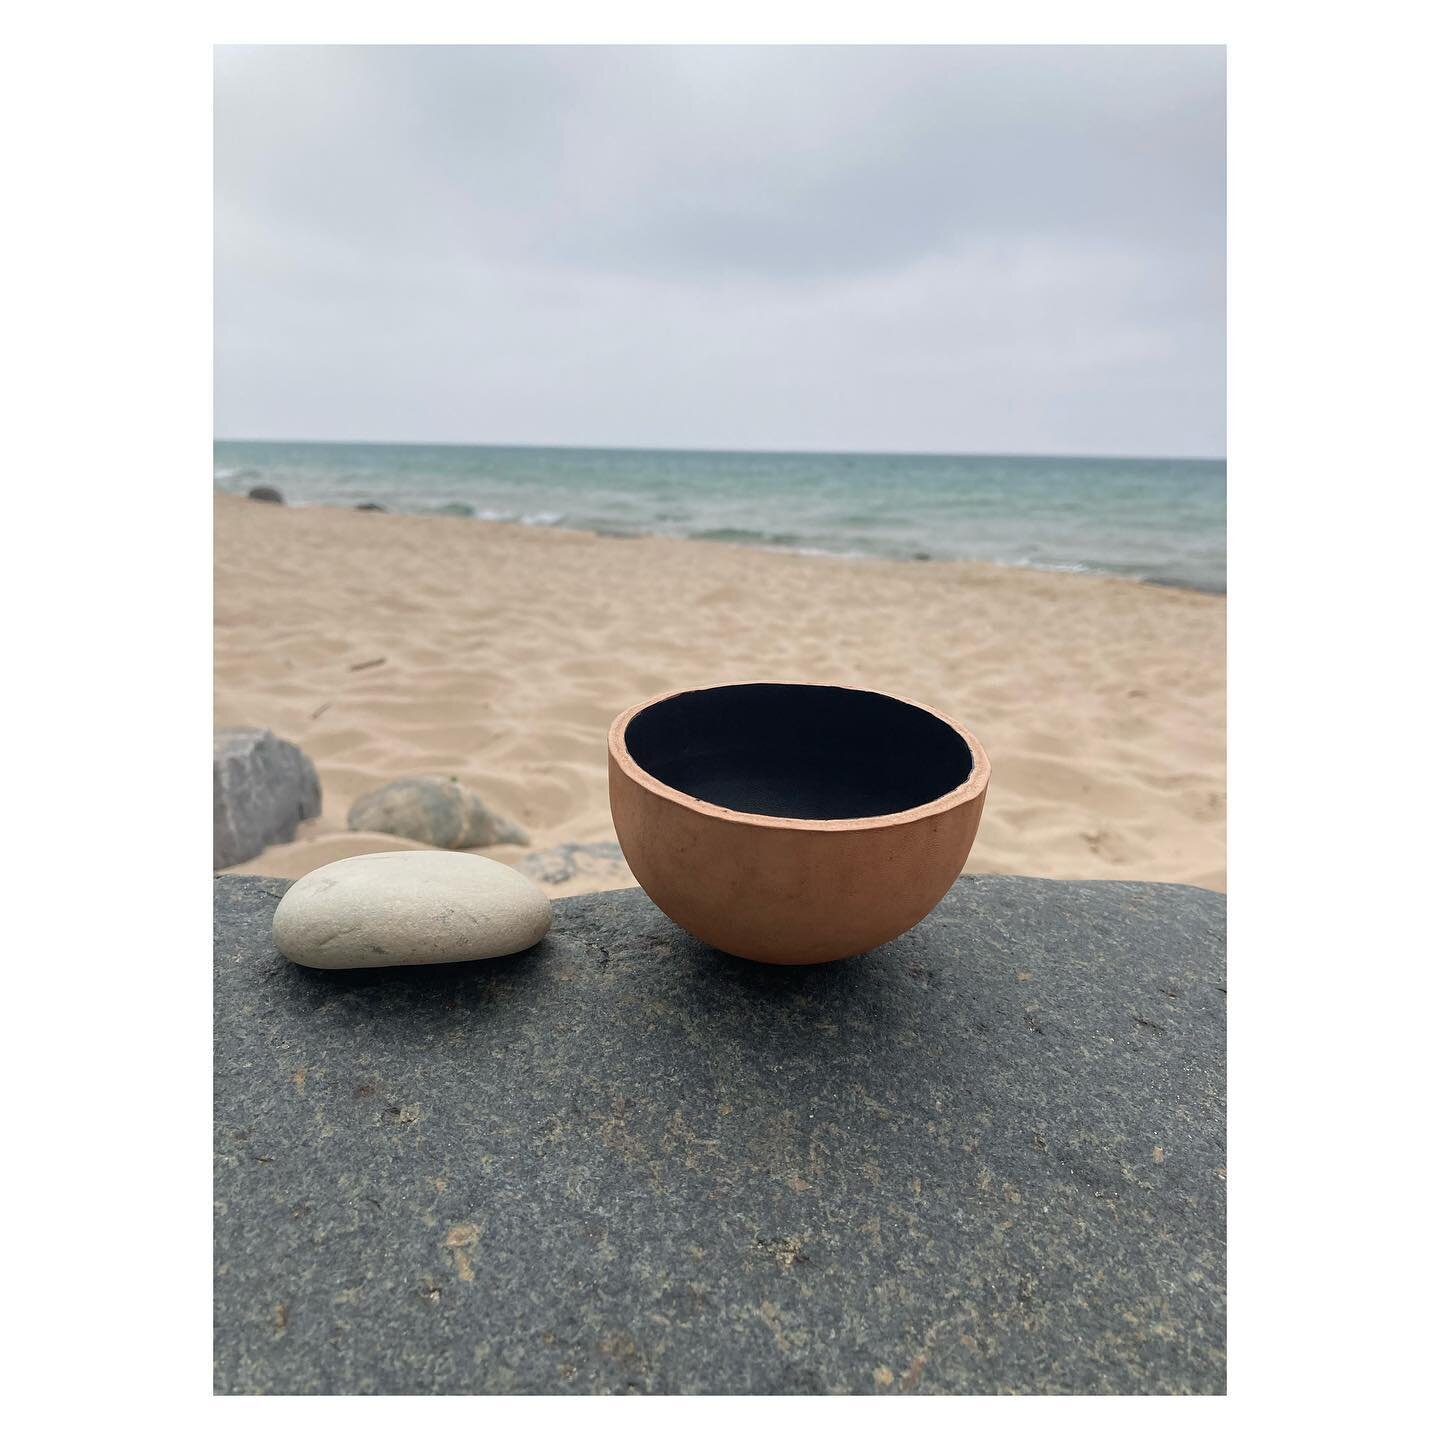 #leatherbowl goes to the beach.